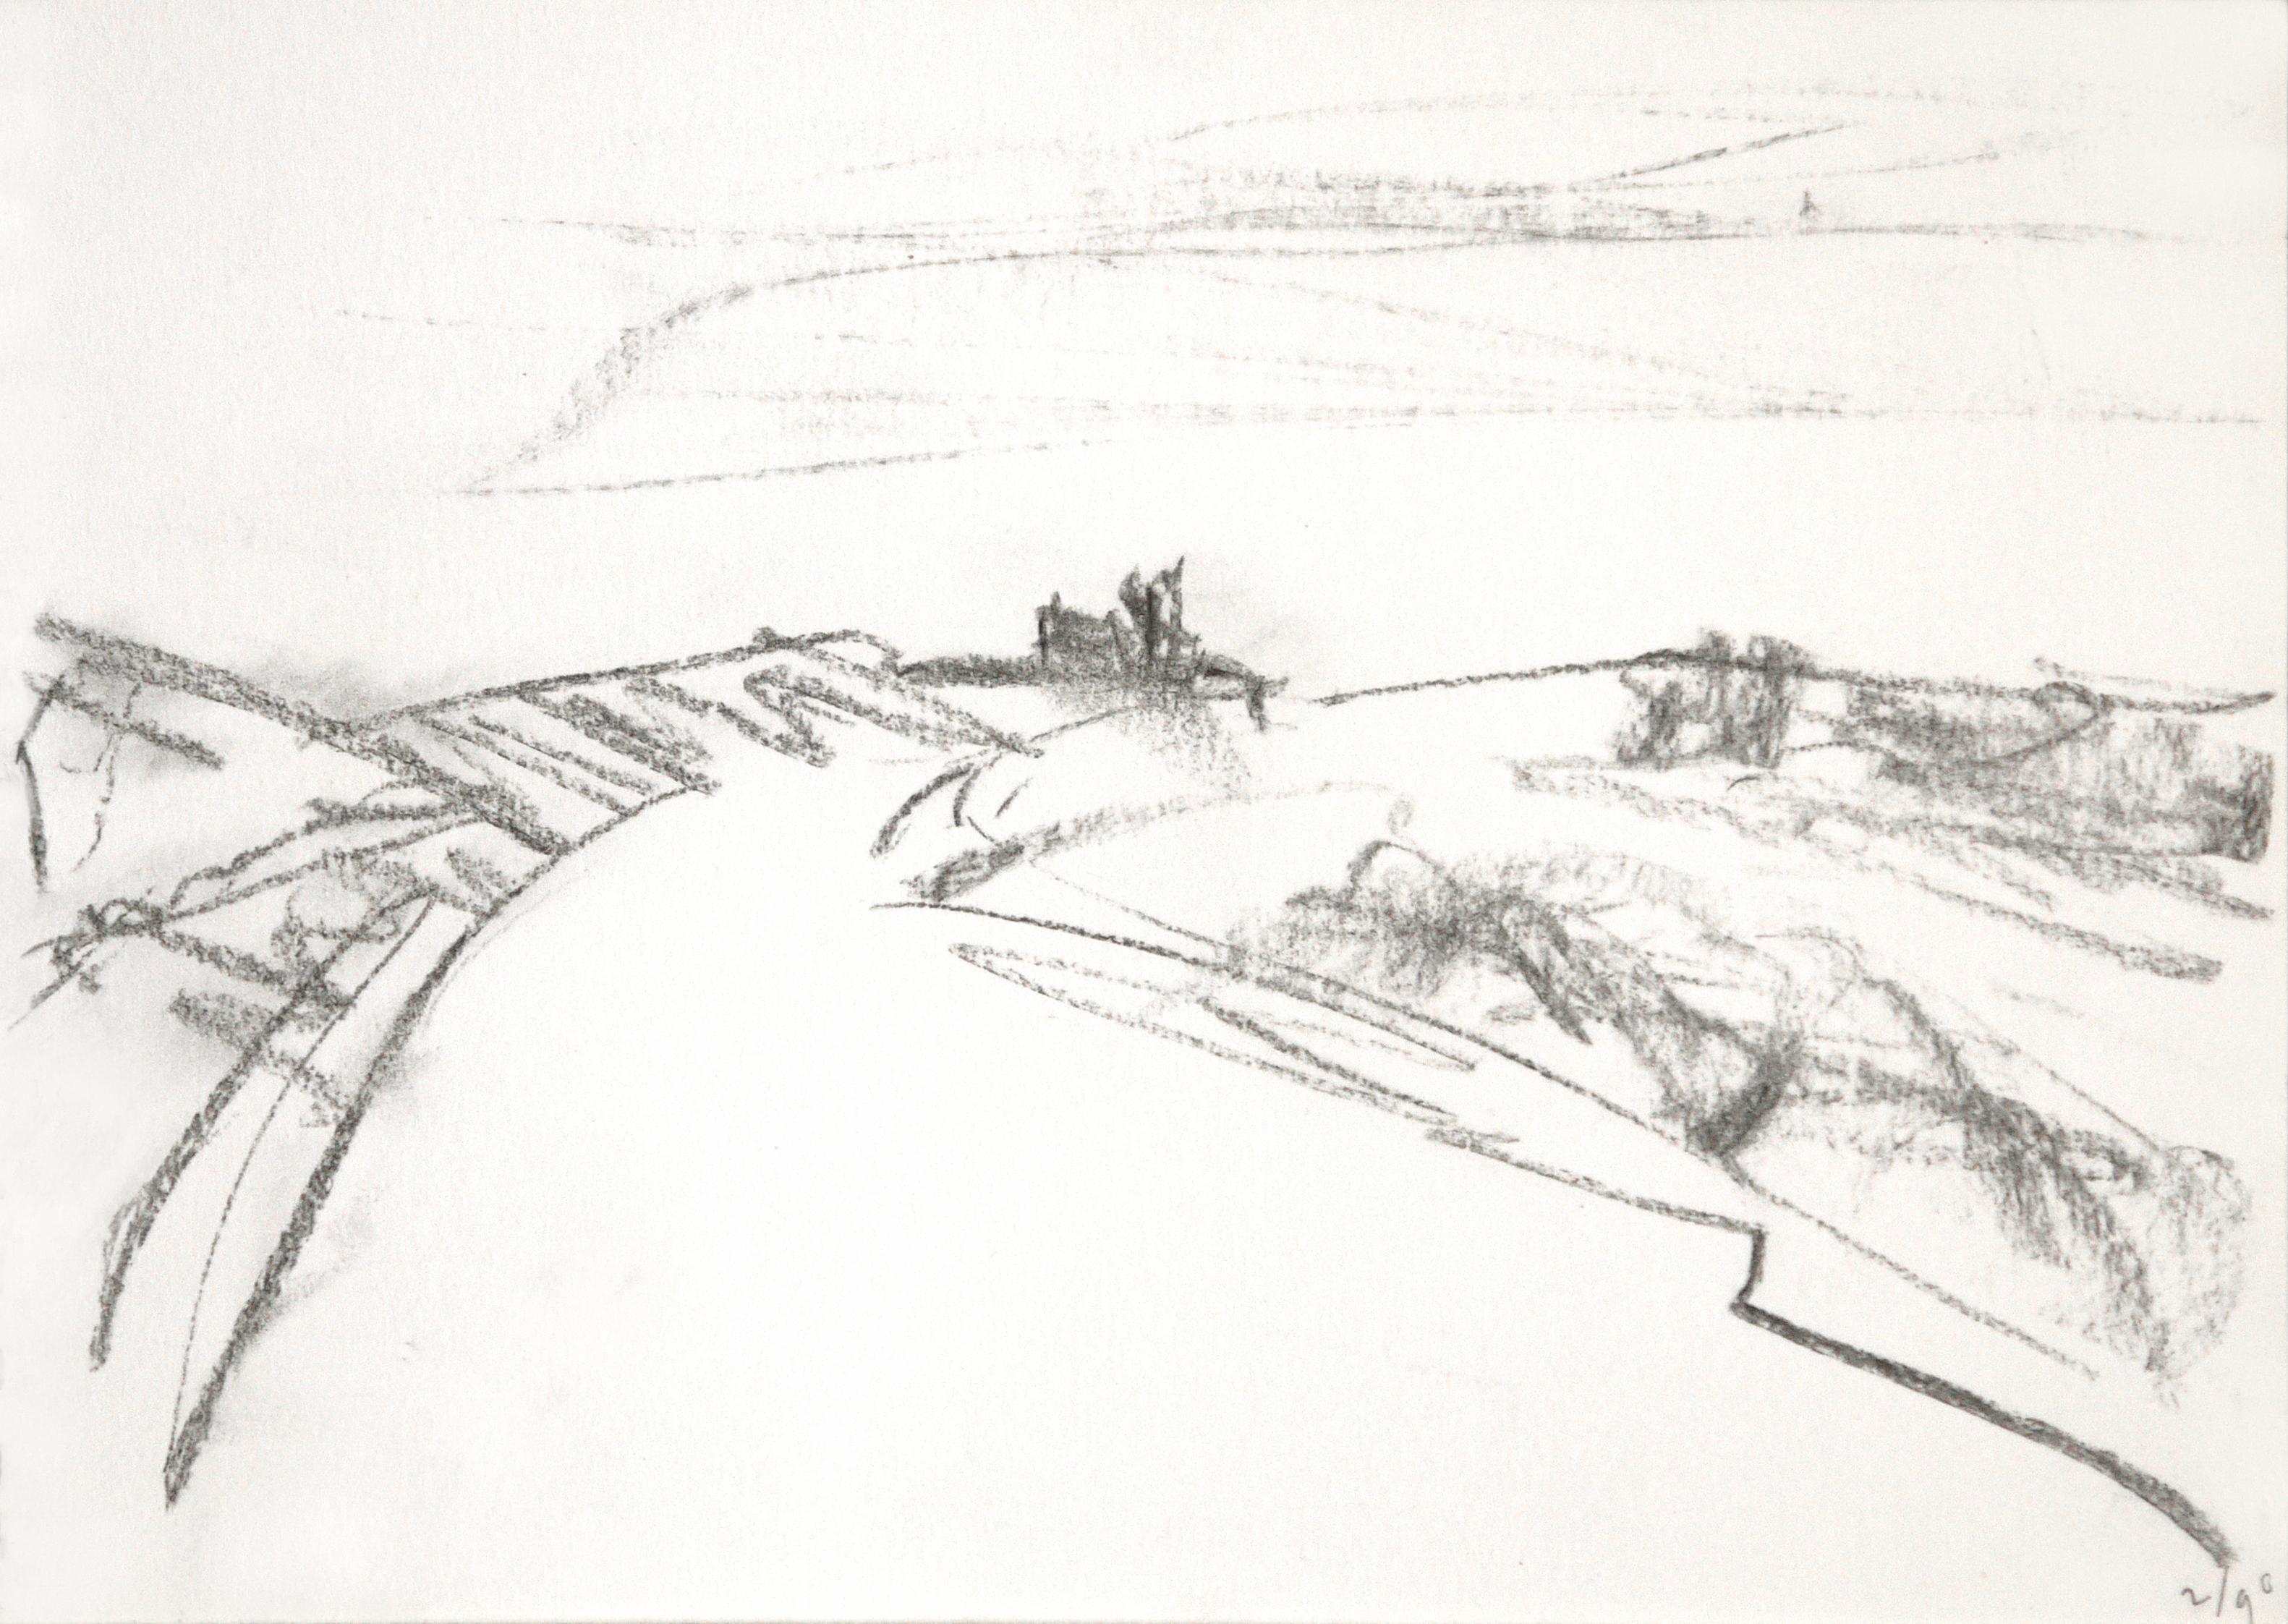 1990 - 'Sketch of Dutch coast', pencil drawing on paper, seascape near Zandvoort and the sandy beach of The Netherlands; A high resolution art image in free download to print, public domain / Commons, CC-BY, artist, Fons Heijnsbroek, 1990, Print, Nature, Nederland, HQ Photo